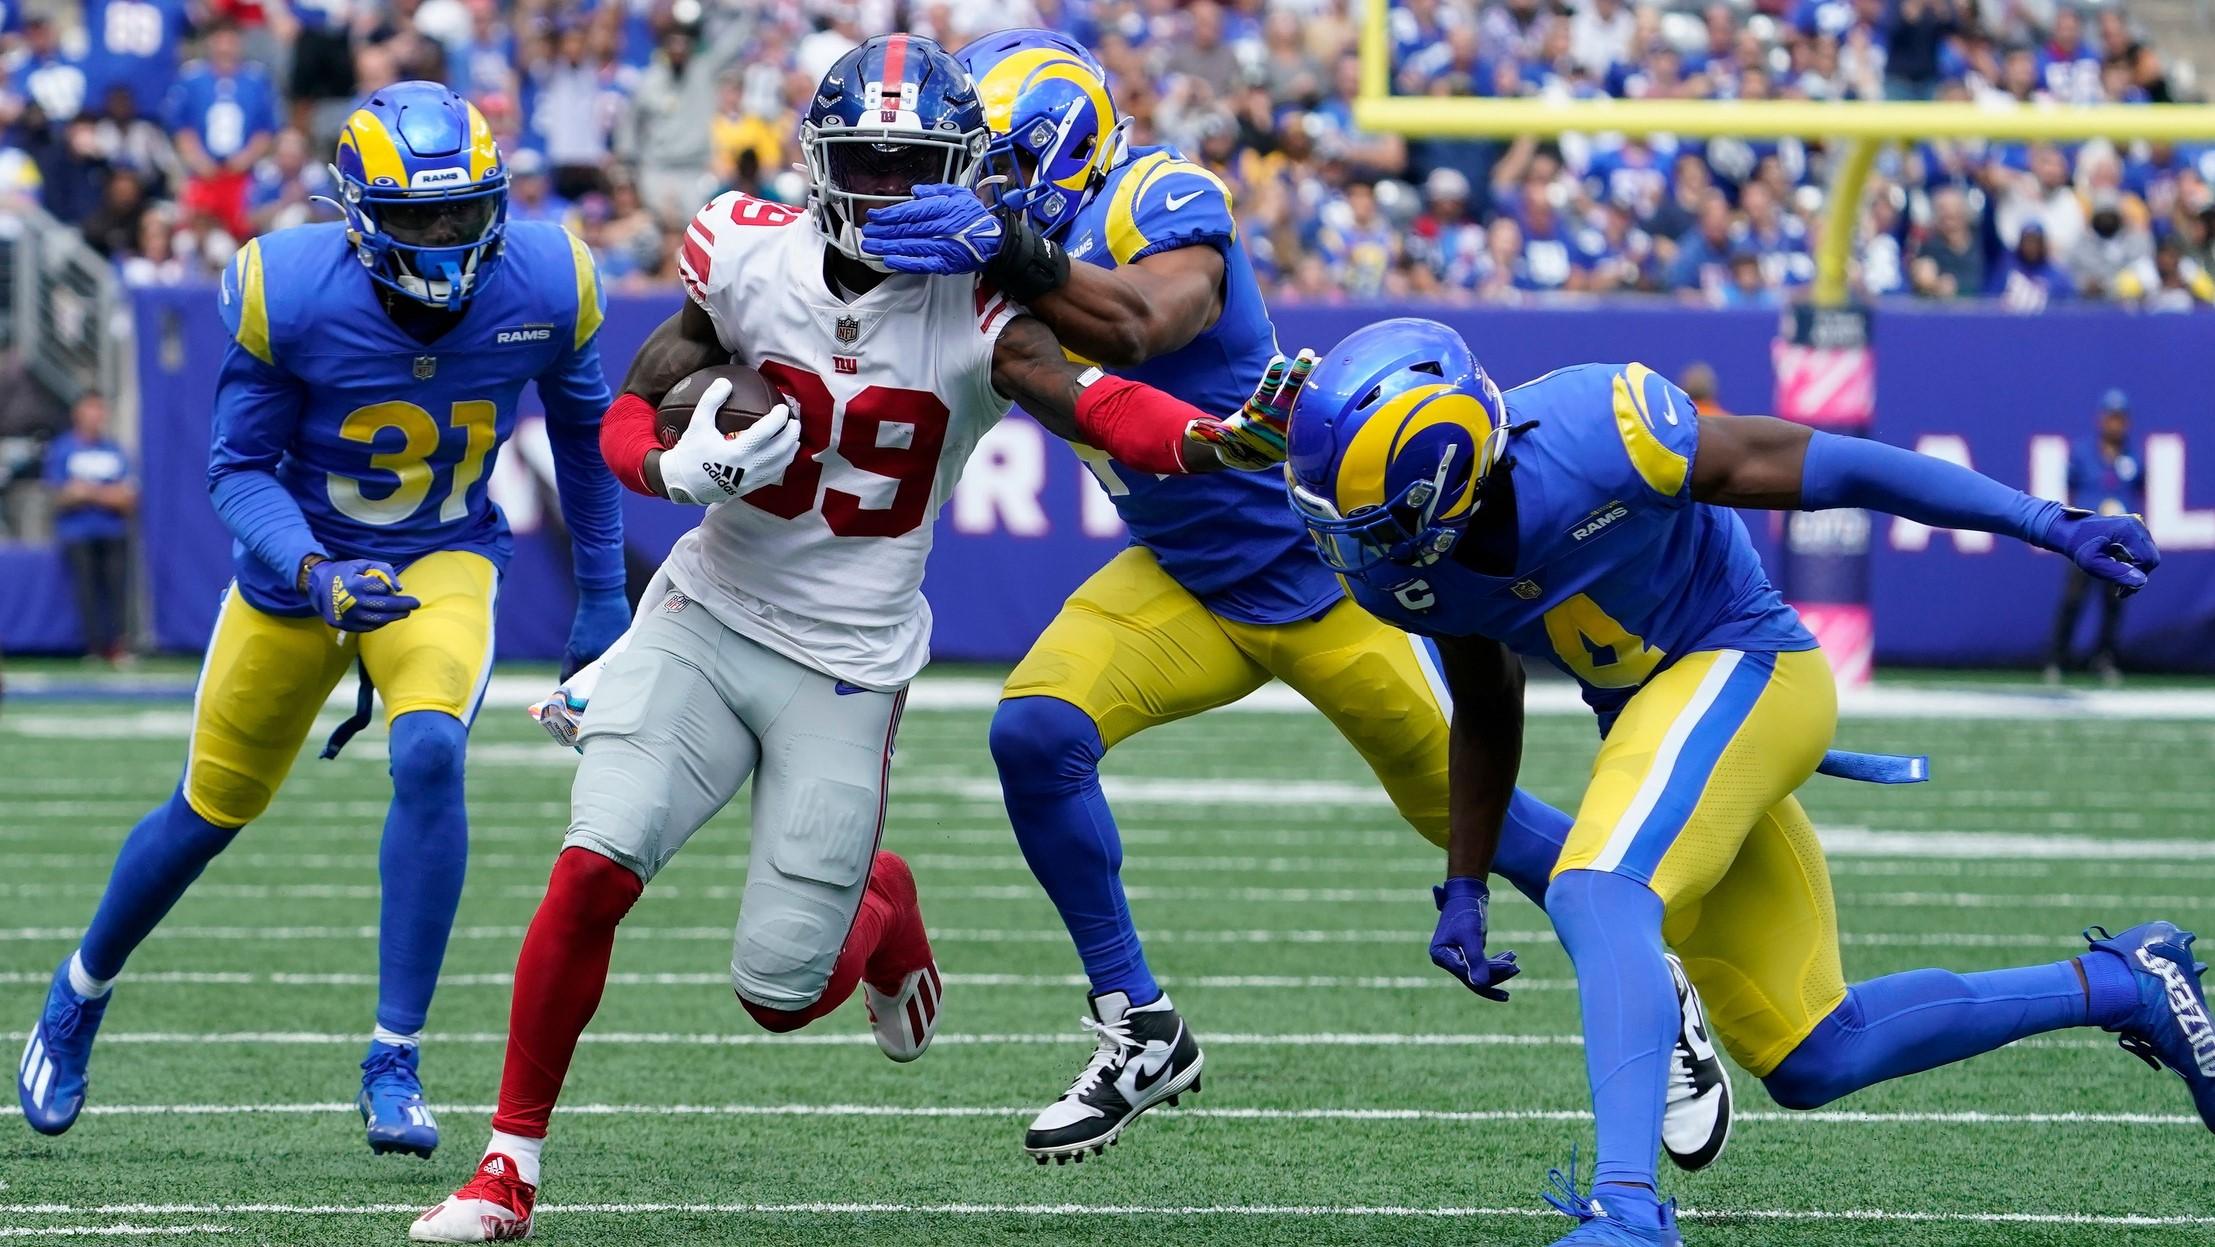 Oct 17, 2021; East Rutherford, New Jersey, USA; New York Giants wide receiver Kadarius Toney (89) makes a catch against the Los Angeles Rams at MetLife Stadium. / Robert Deutsch-USA TODAY Sports